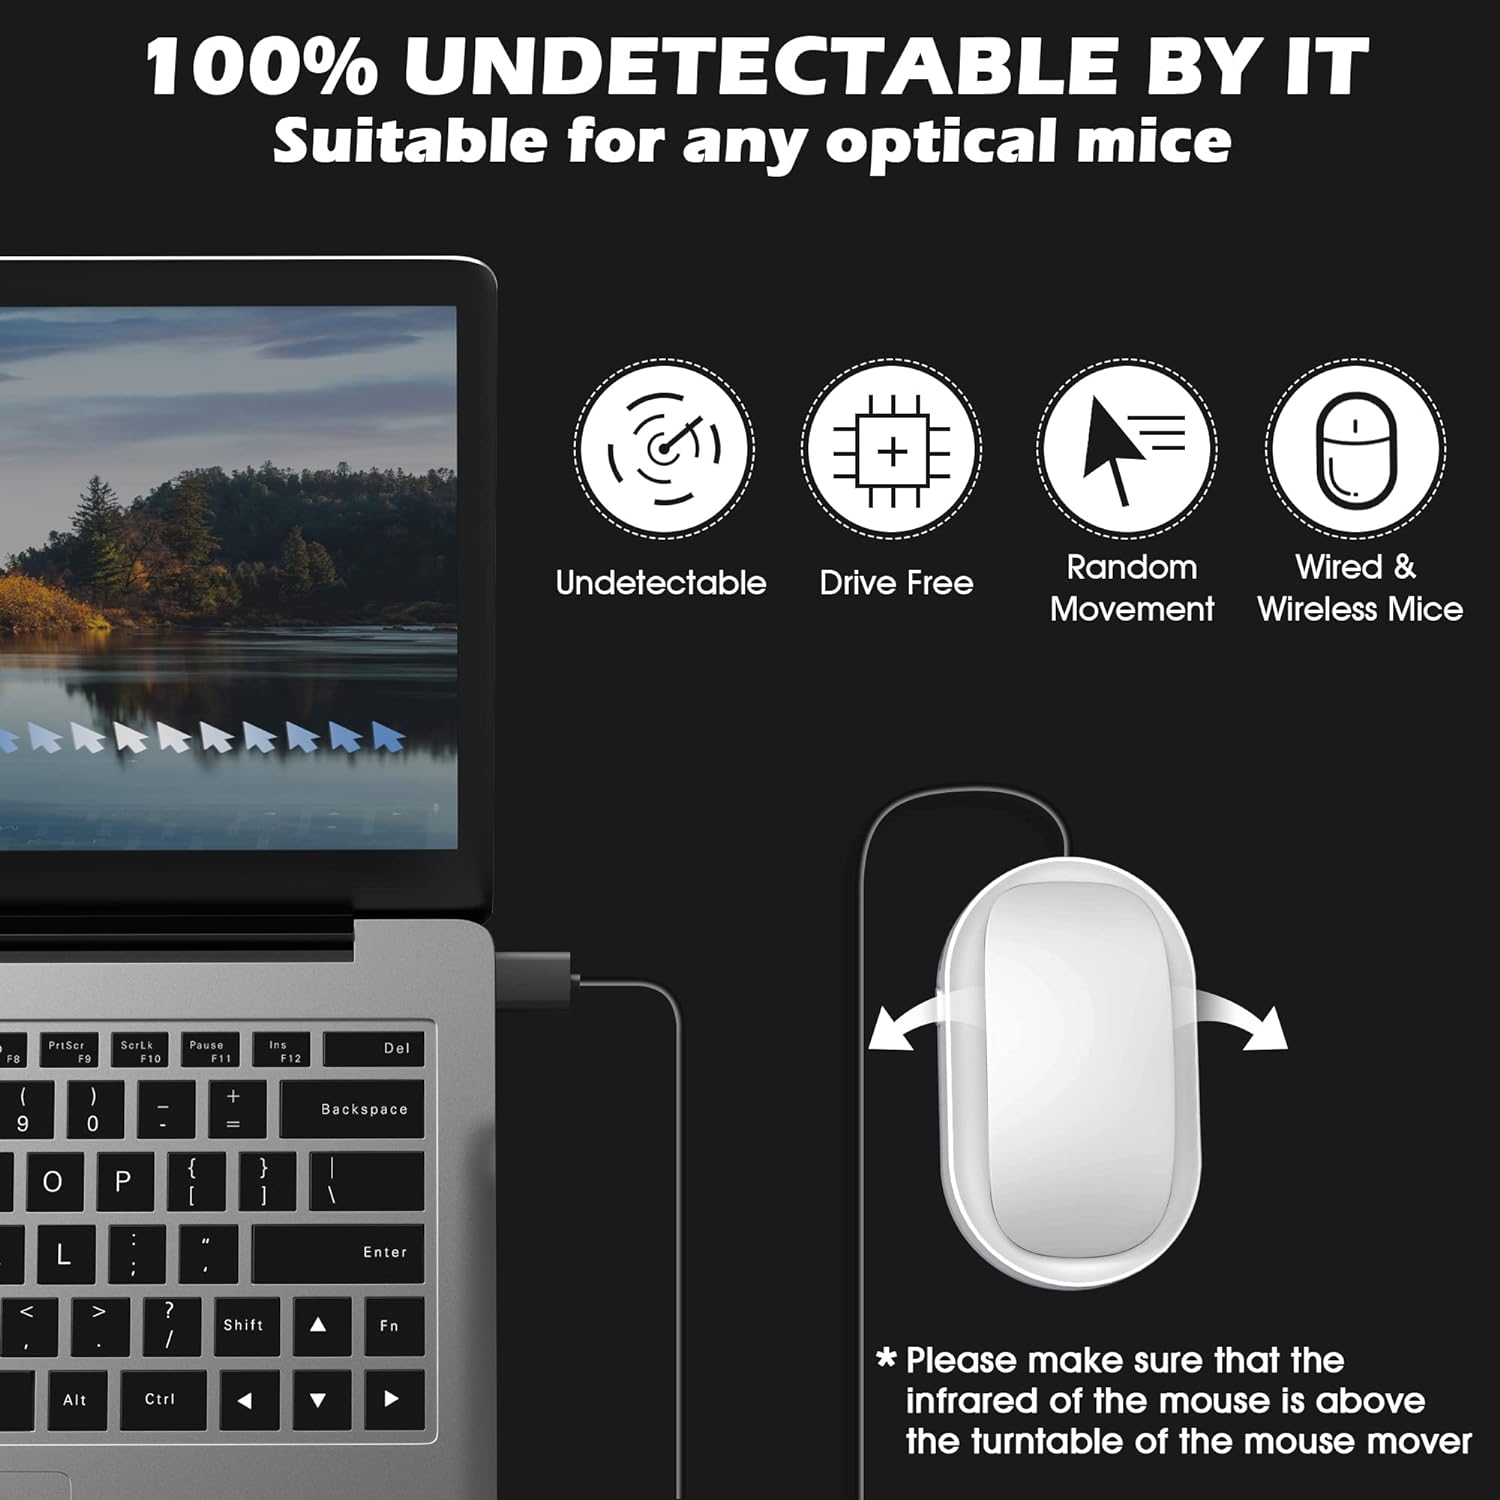 Undetectable-Mouse-Mover-Mouse-Jiggler-Keeps-PC-Active-No-Software-Randomly-Automatic-Driver-Free-Prevents-Computer-Laptops-From-Sleeping-Modes-40